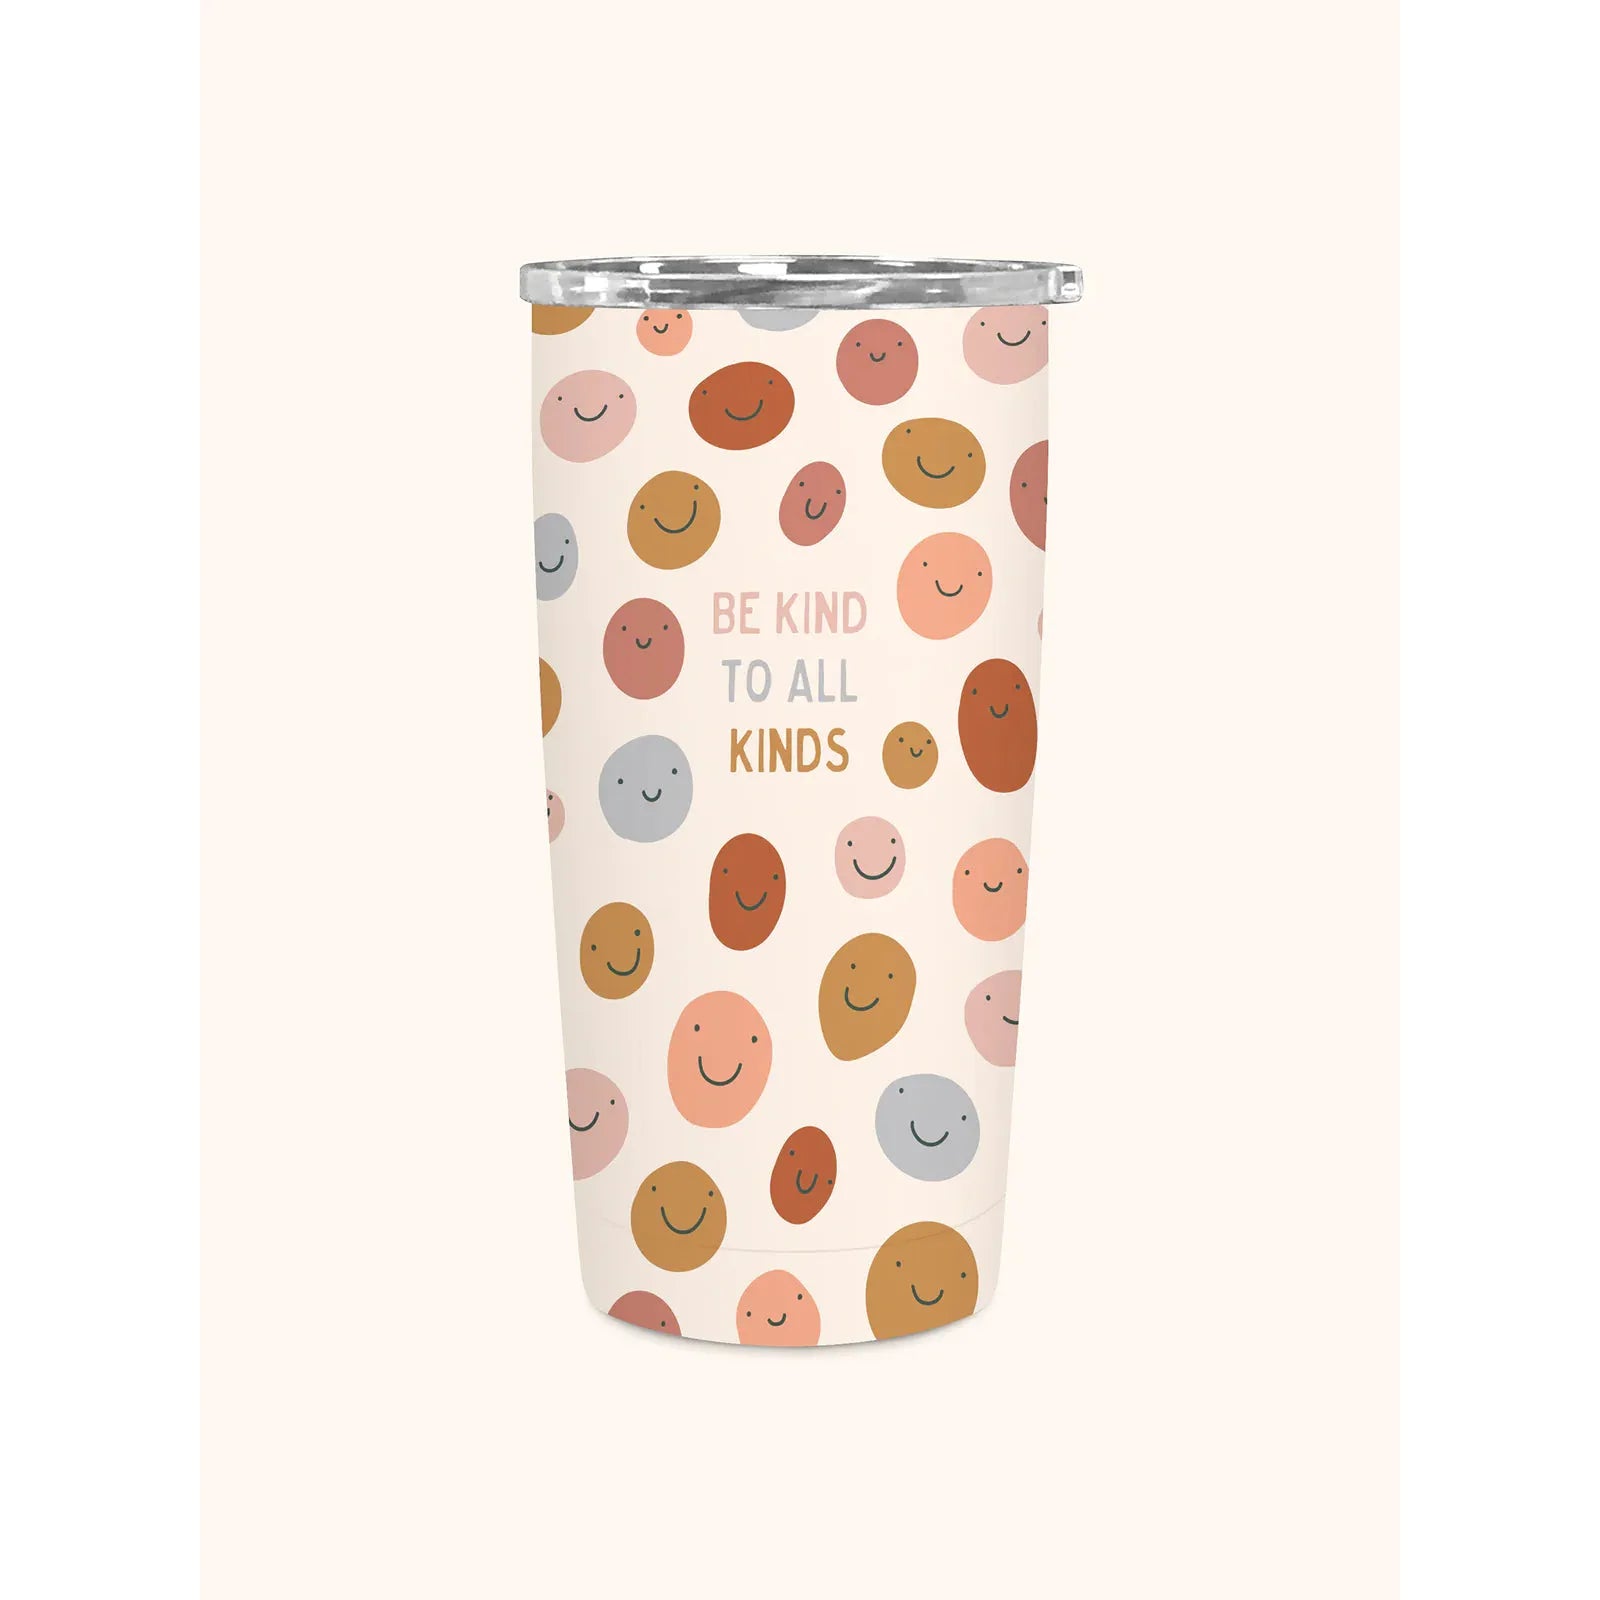 Vaso Acero Inoxidable Be Kind to All Kinds